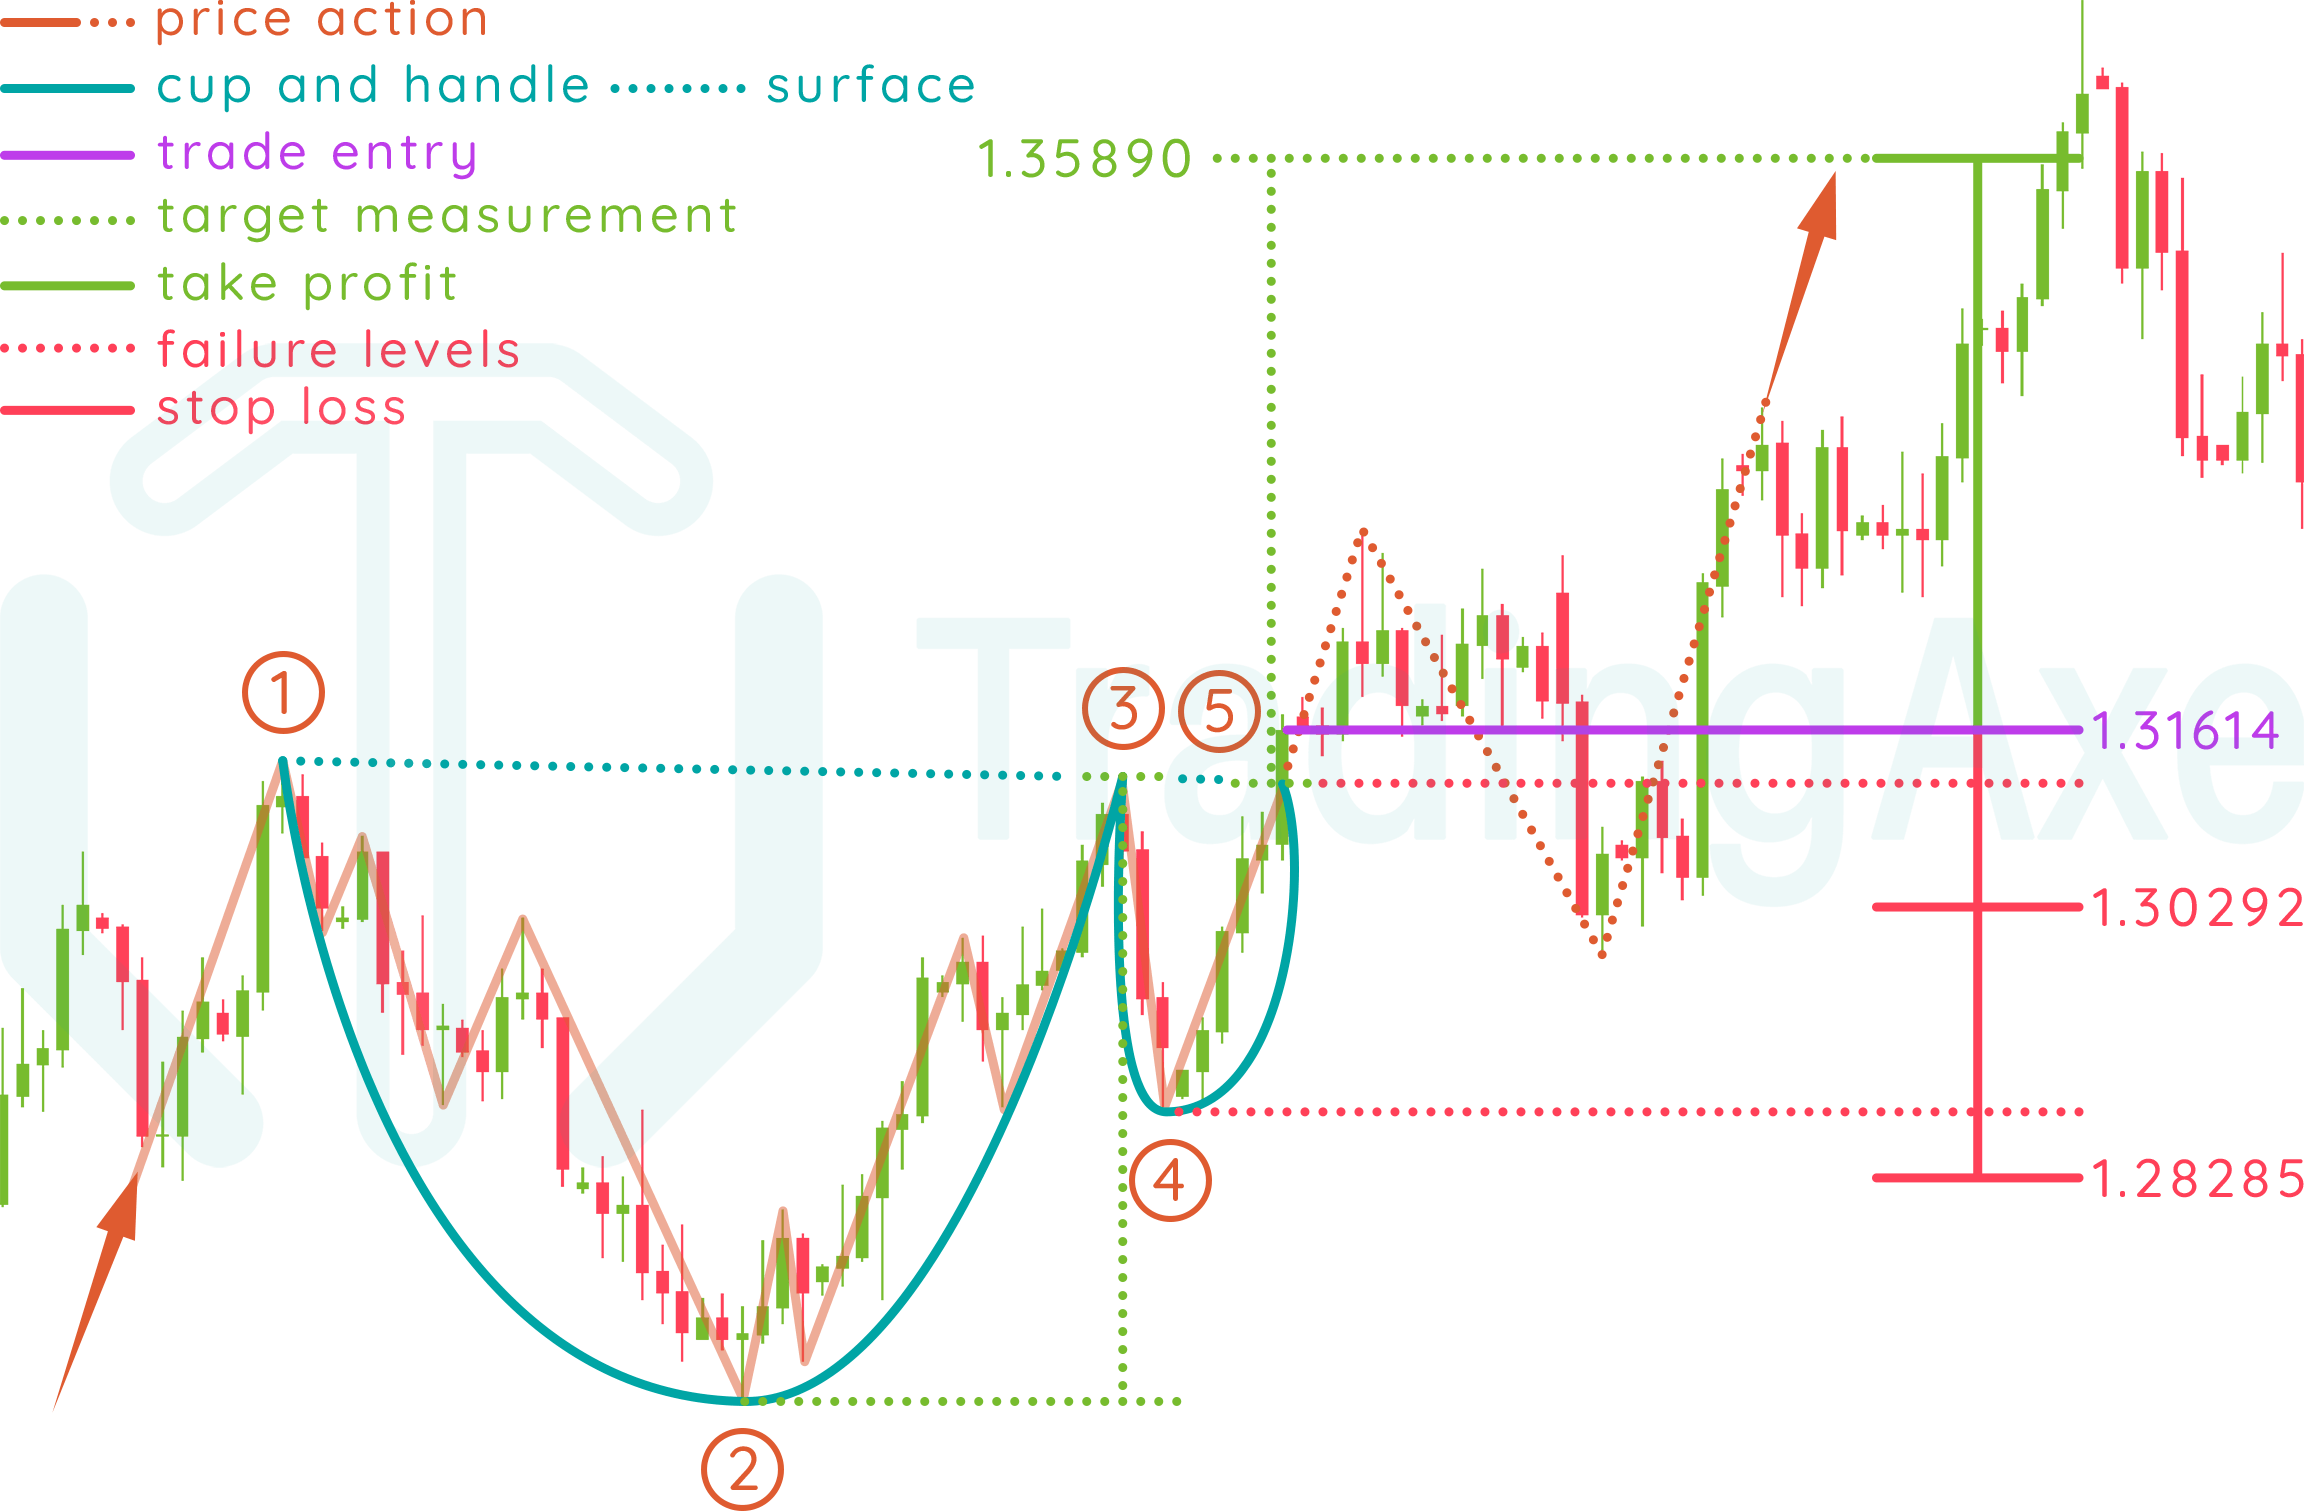 Cup and handle real trading example